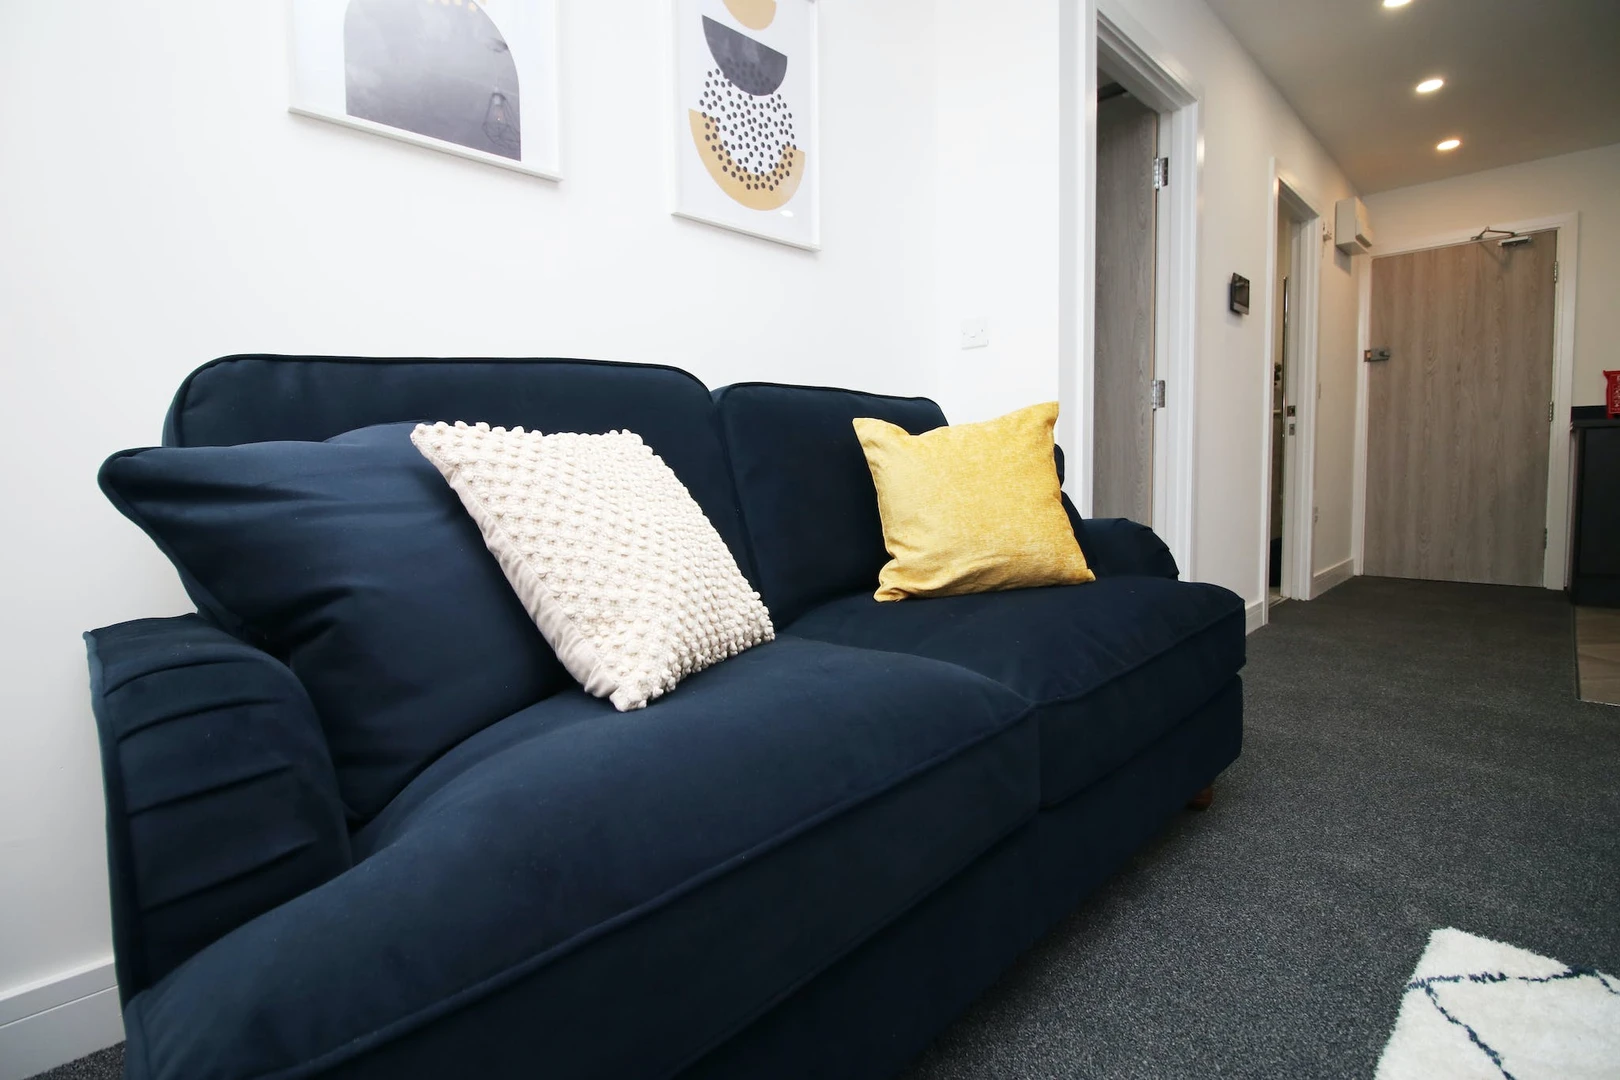 Accommodation in the centre of Cardiff